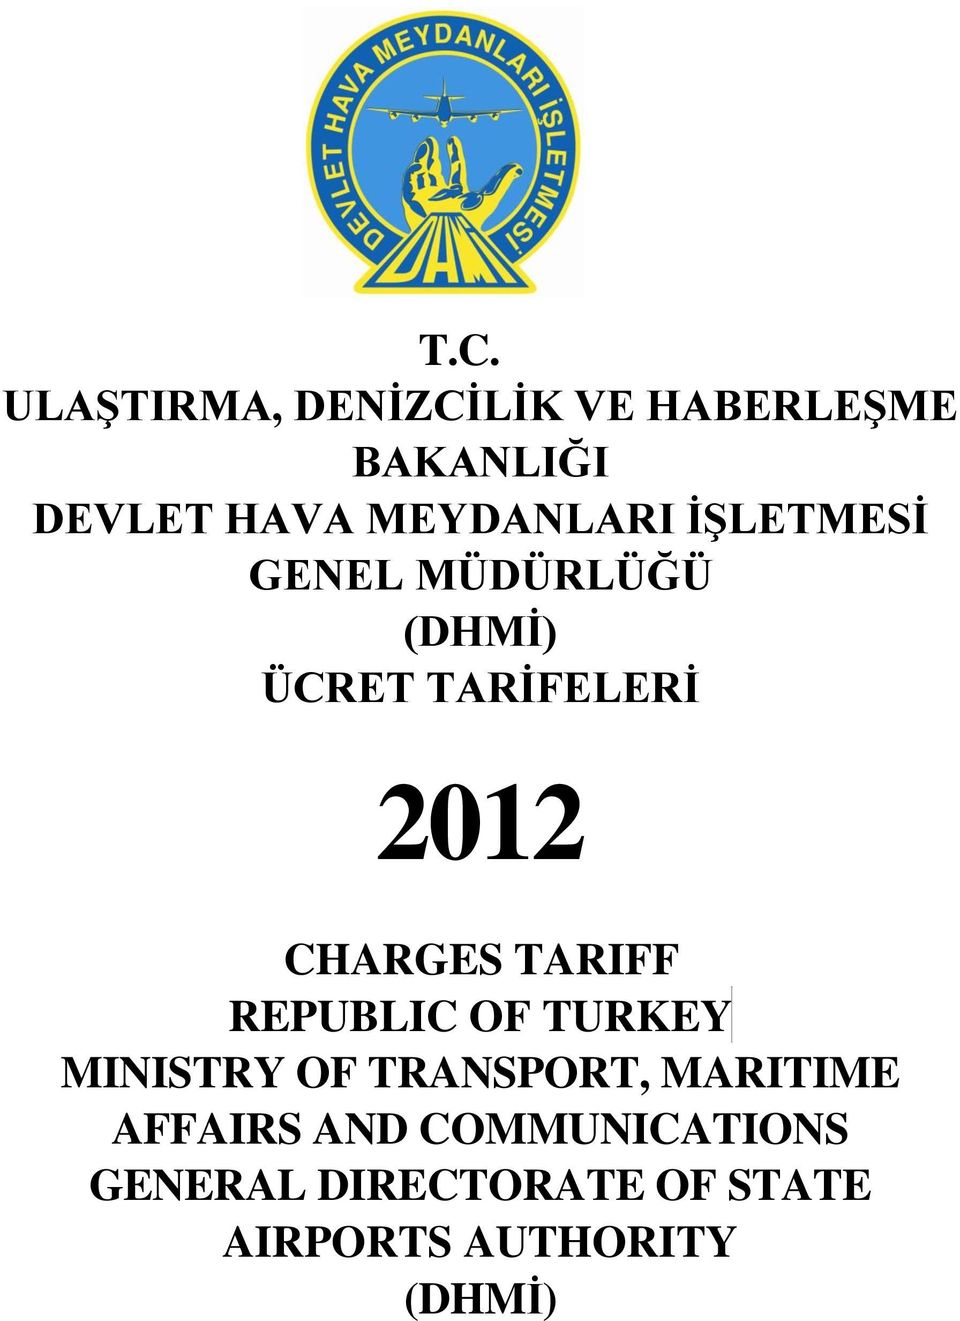 CHARGES TARIFF REPUBLIC OF TURKEY MINISTRY OF TRANSPORT, MARITIME